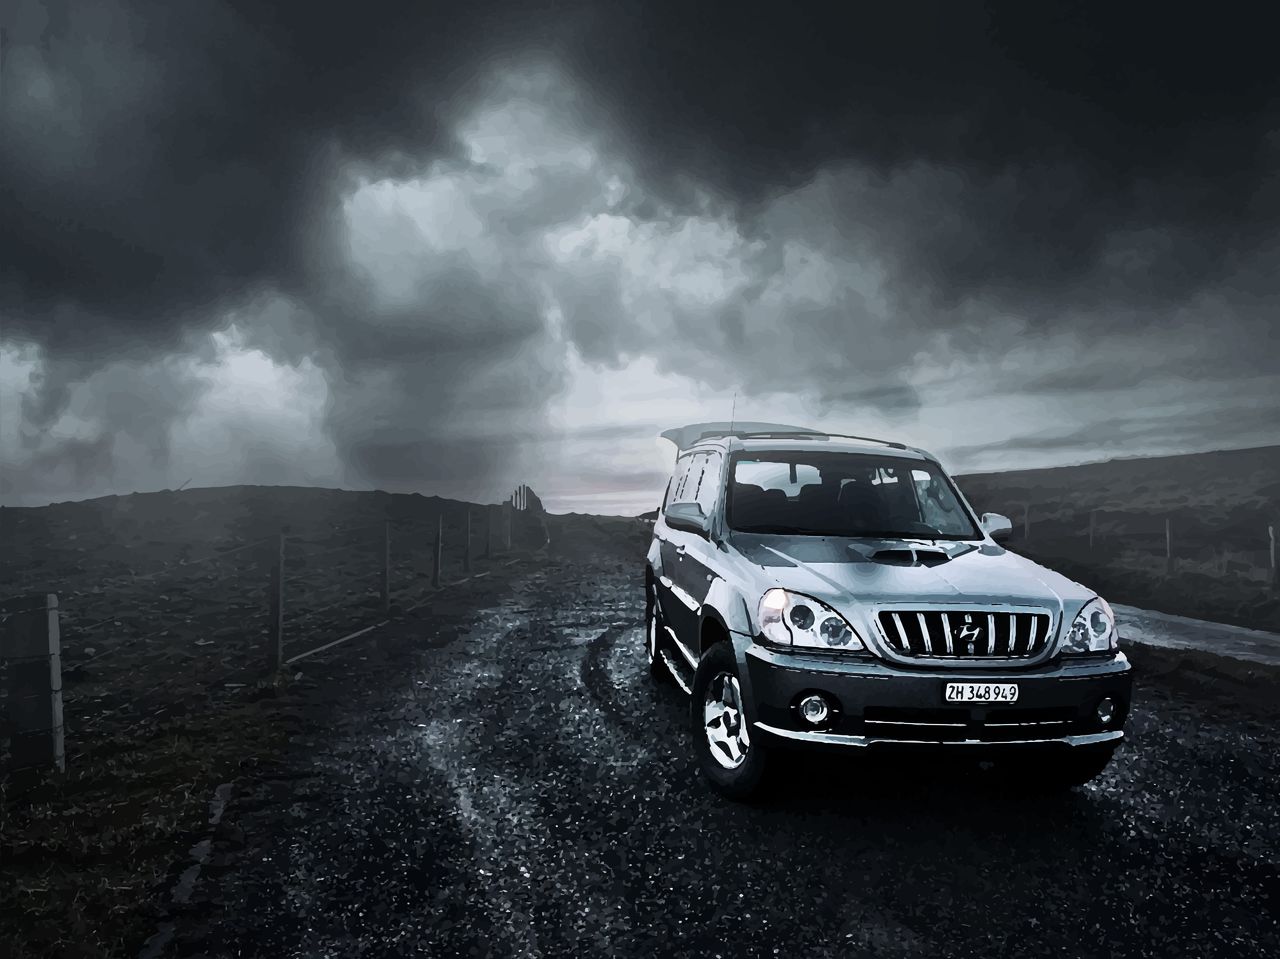 General 1280x959 4x4 car storm rain high contrast clouds photoshopped photo manipulation vehicle numbers silver cars outdoors Hyundai Korean cars offroad